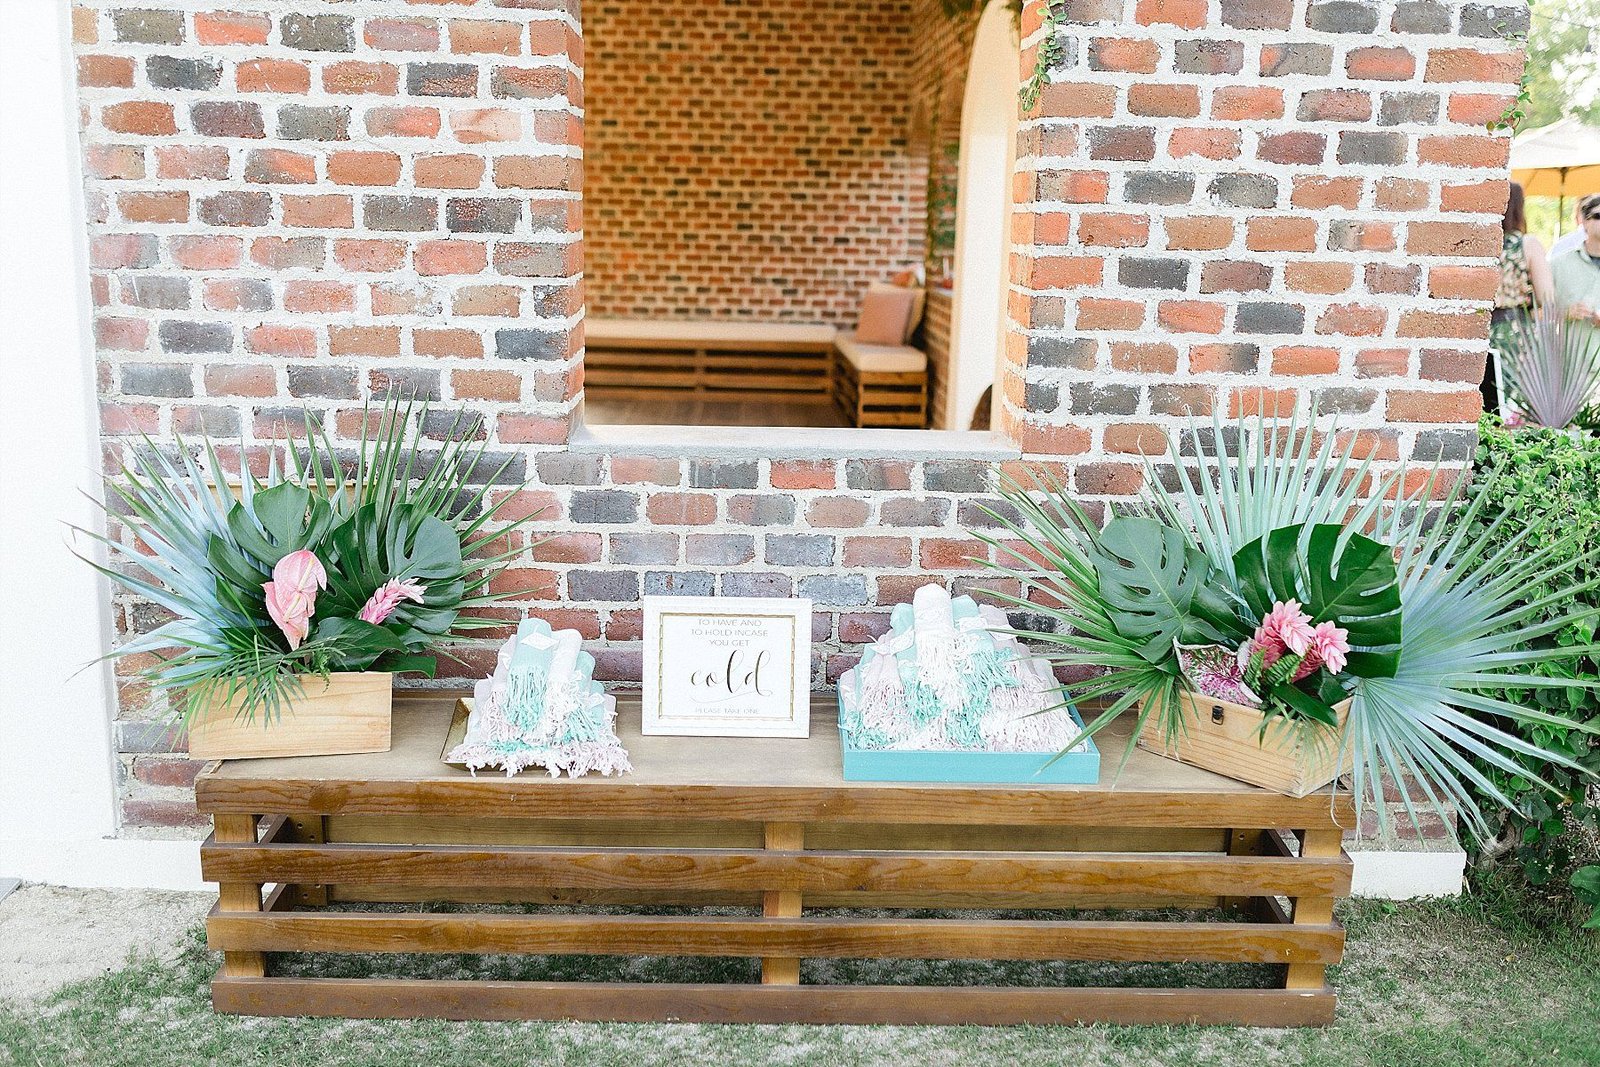 Pashmina setup with flower arrangements on bench. Great to do when the weather can be a bit chilly and works great for wedding favors. Wedding Planning by Cabo Wedding Services and Wedding Photography done by Sara Richardson